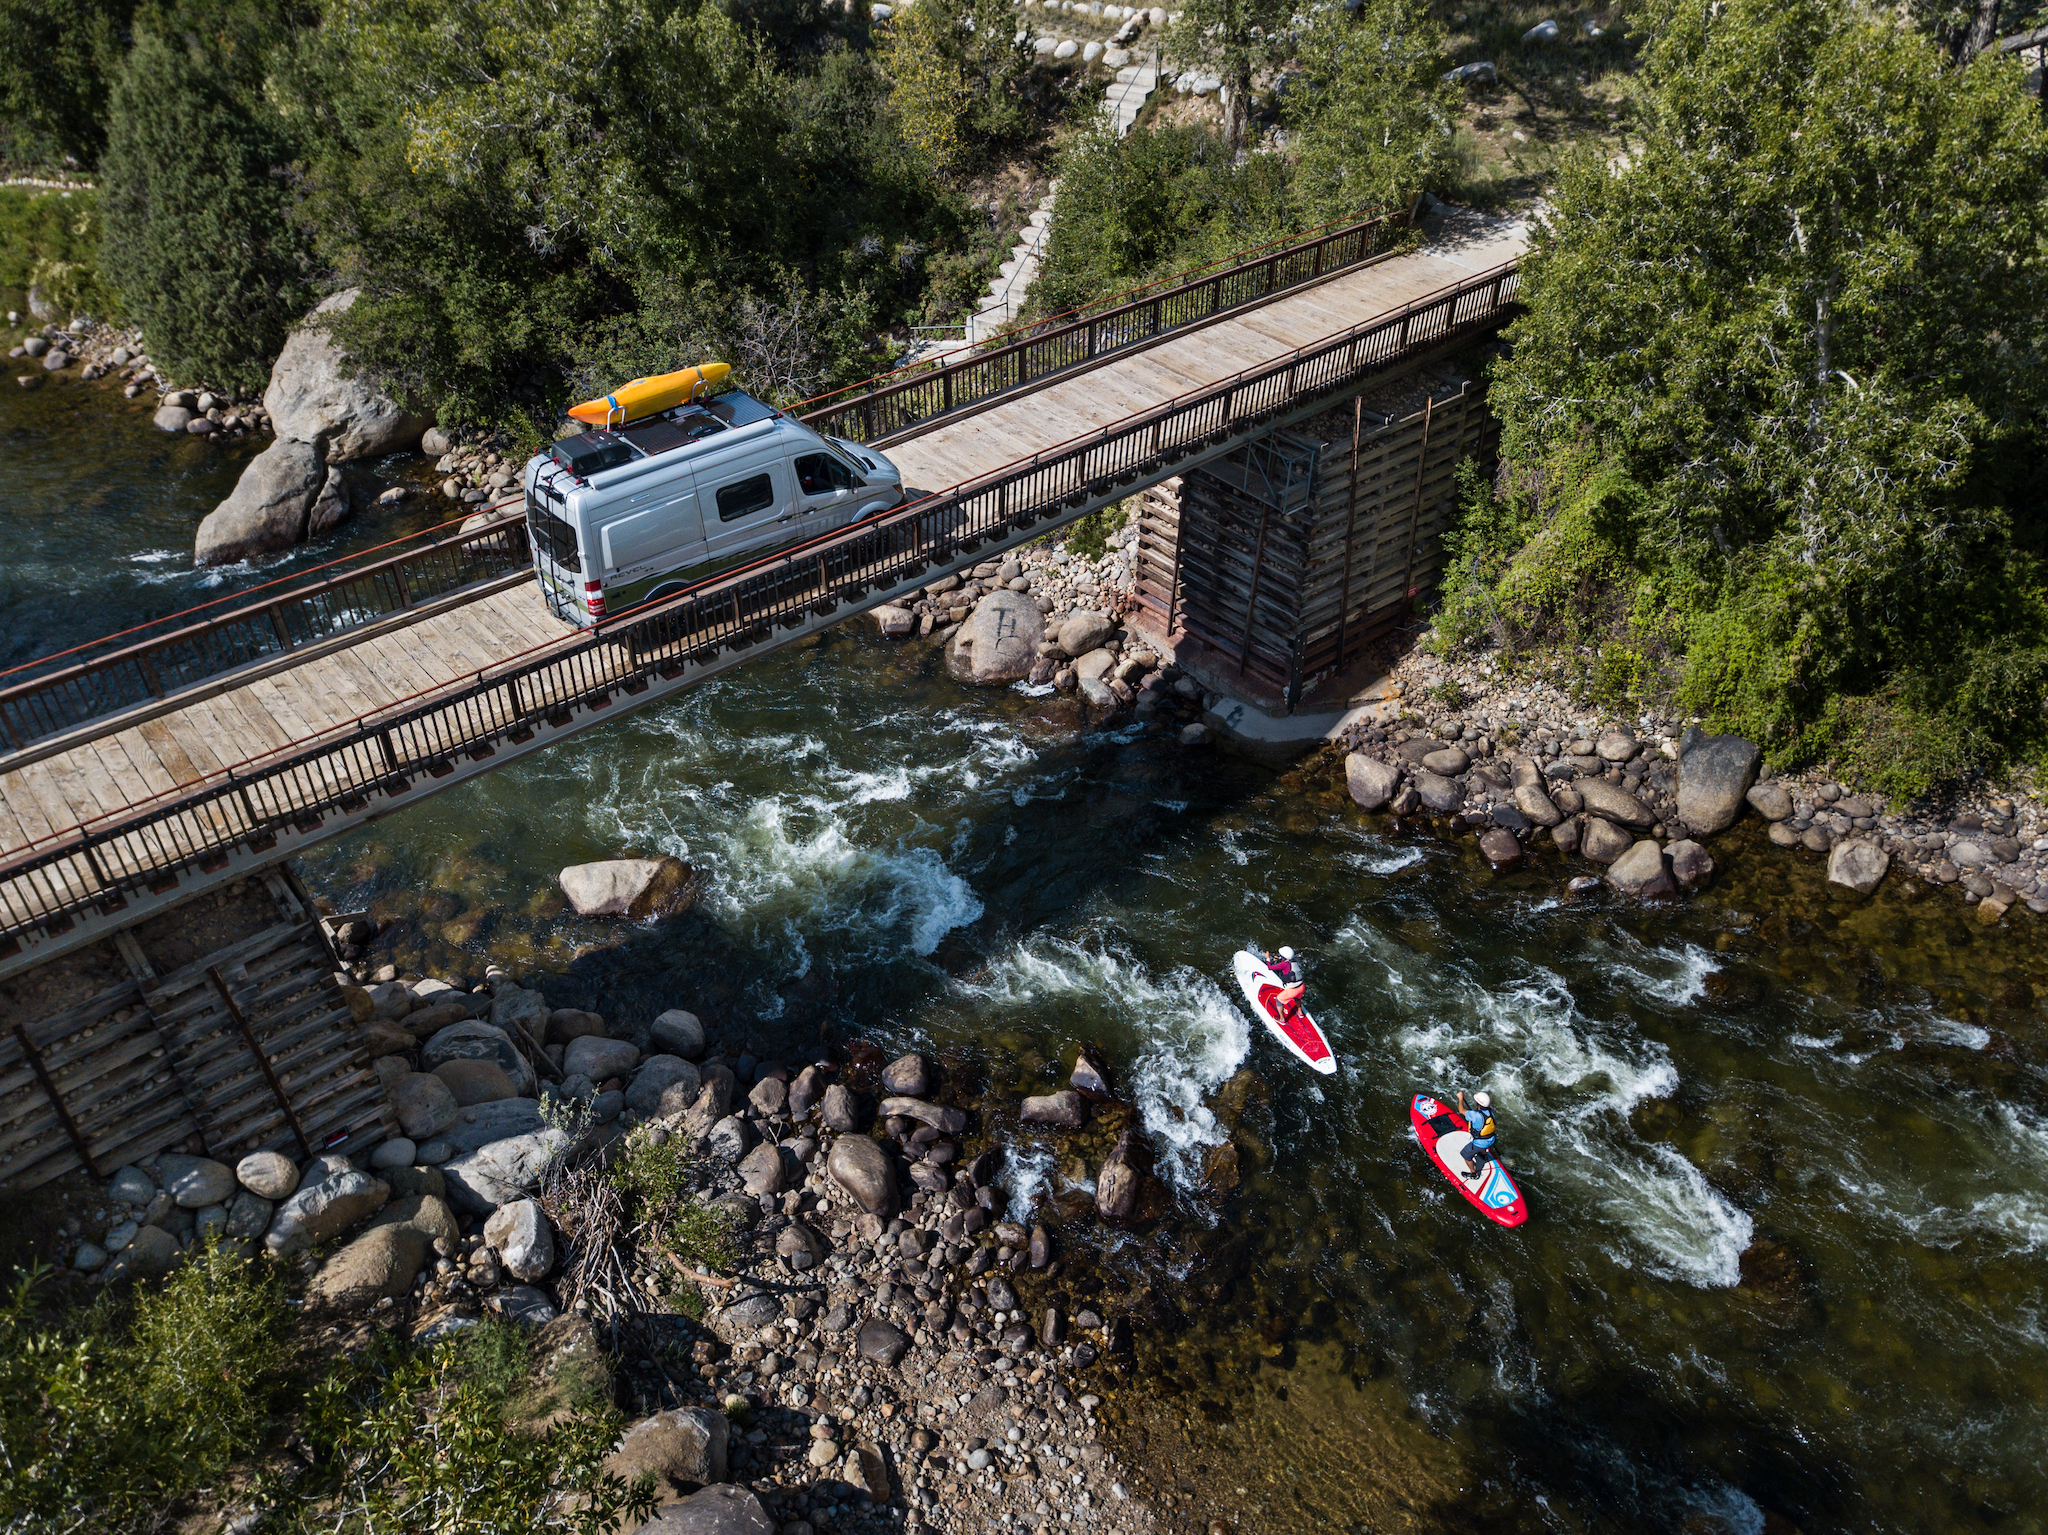 Winnebago Revel parked on a bridge with paddle boarders passing on the water running below.